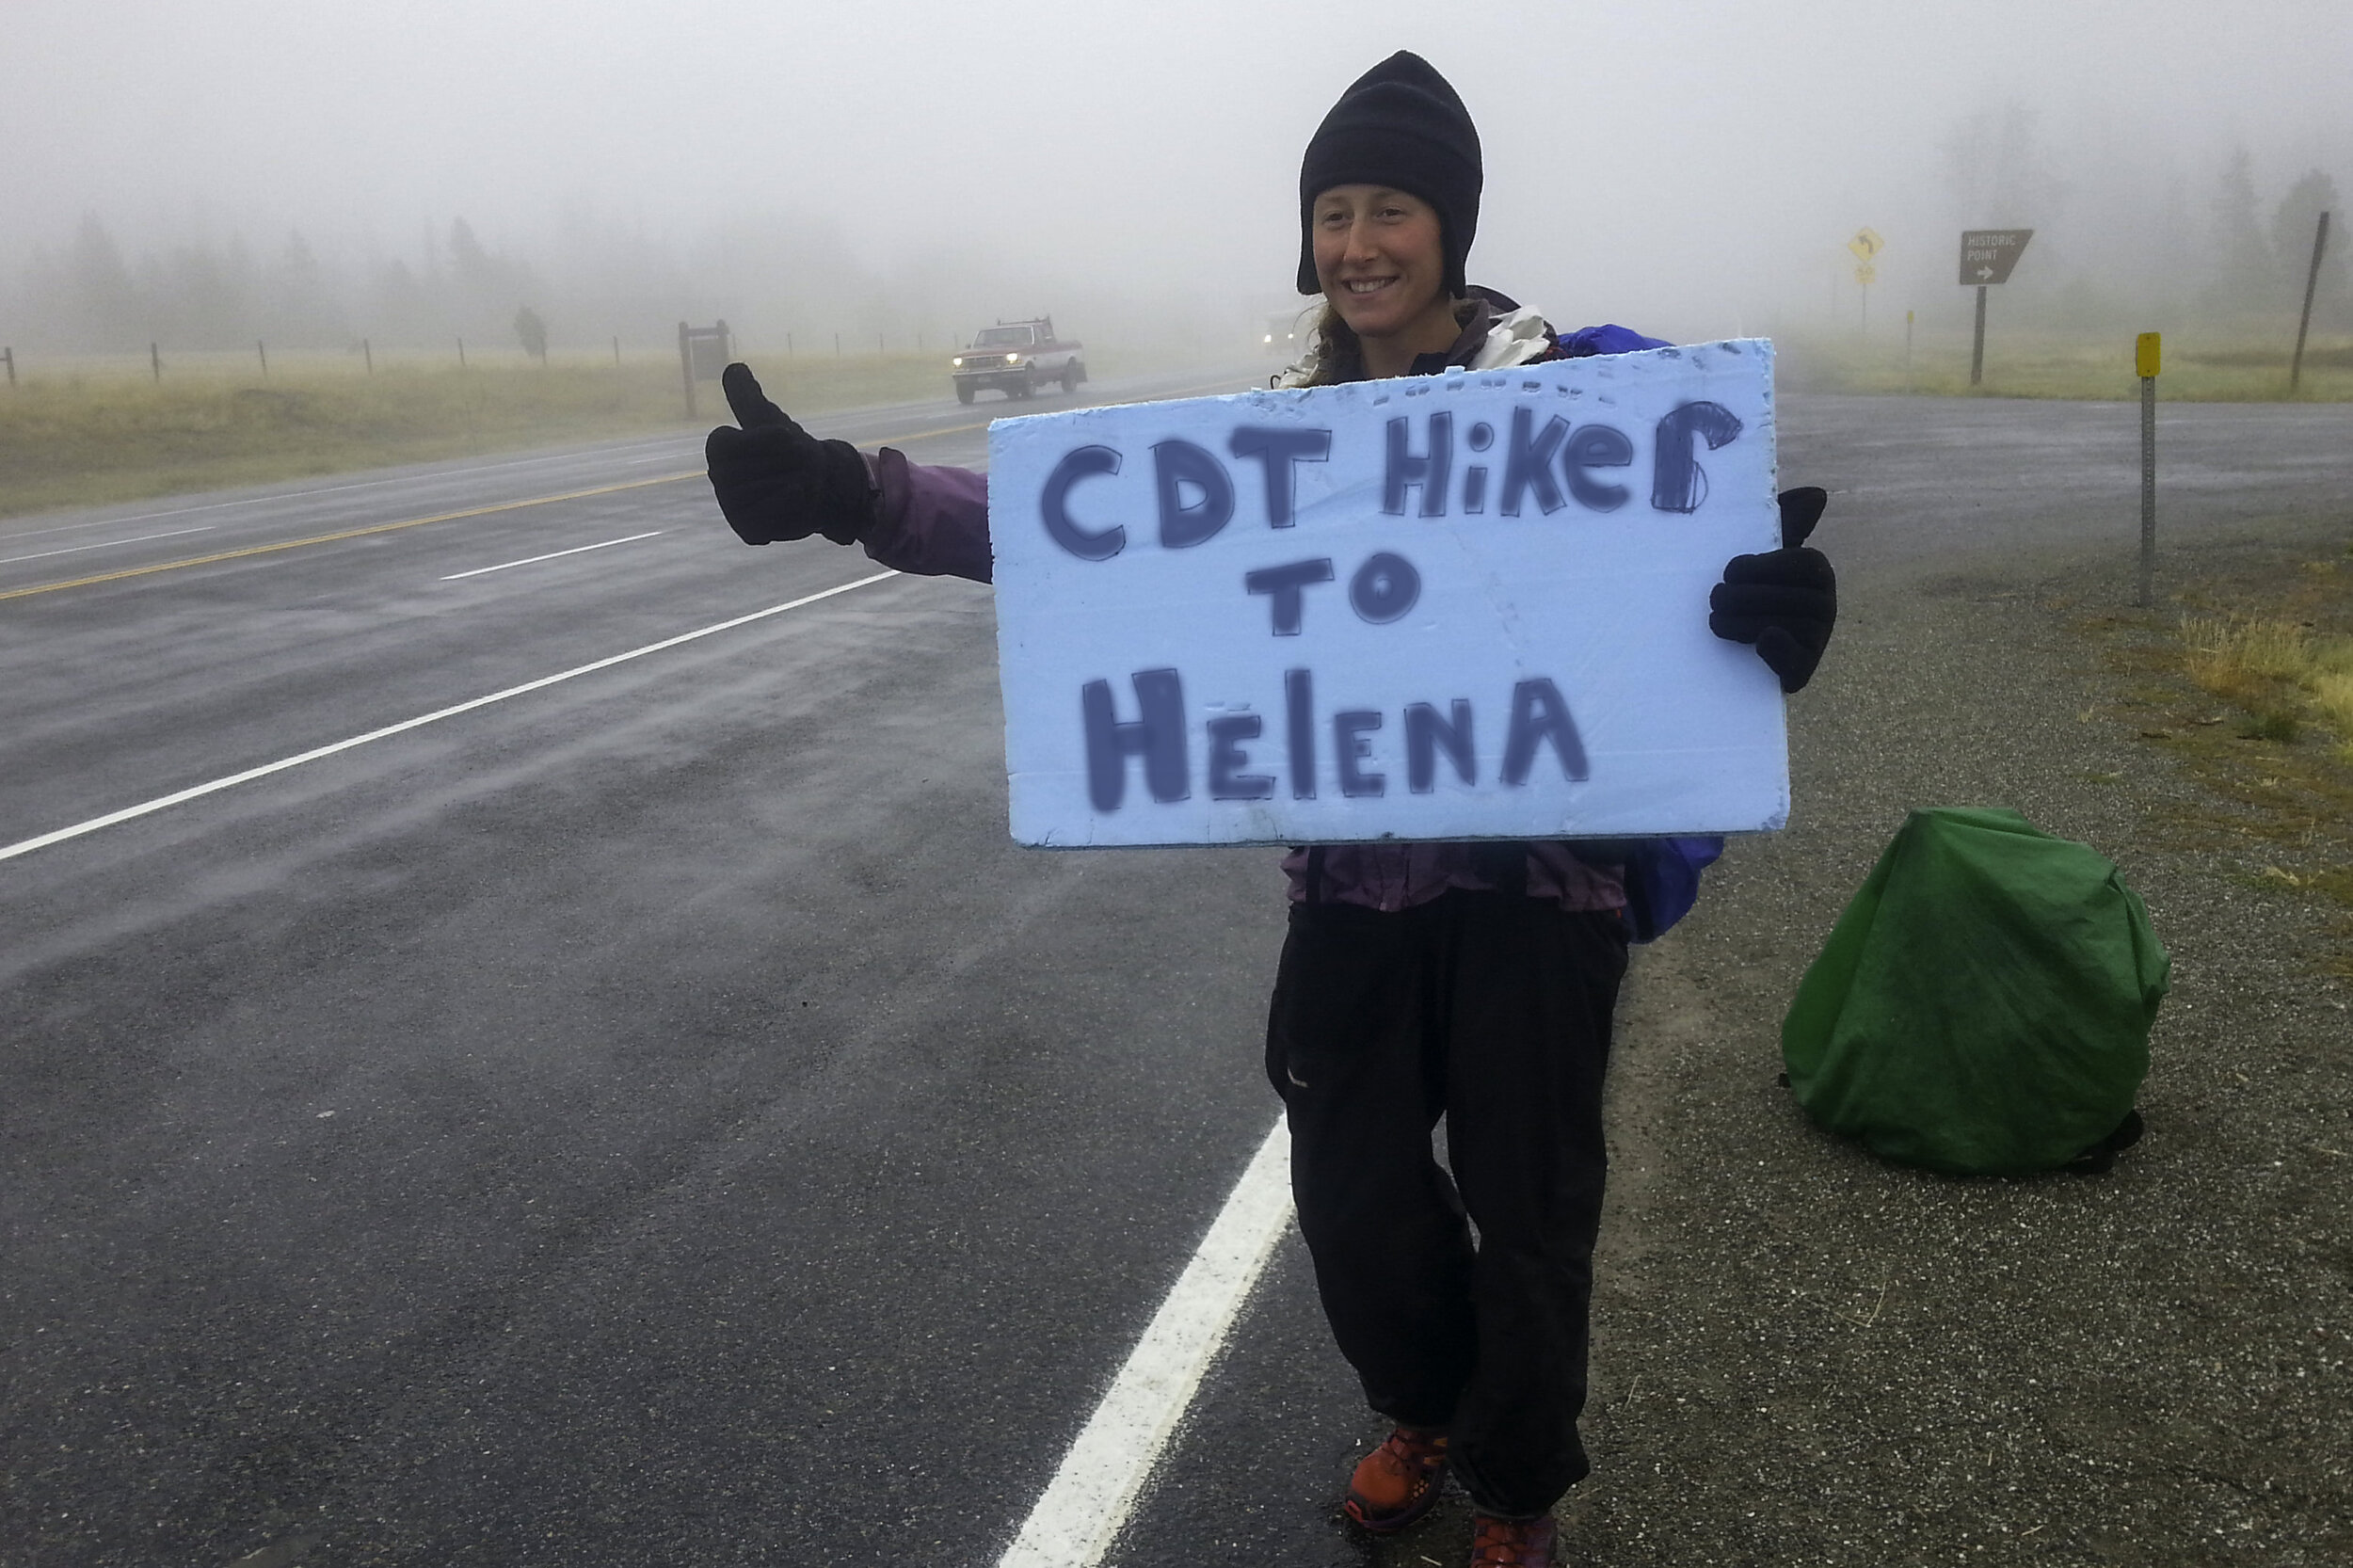 Making a sign is helpful when trying to hitchhike